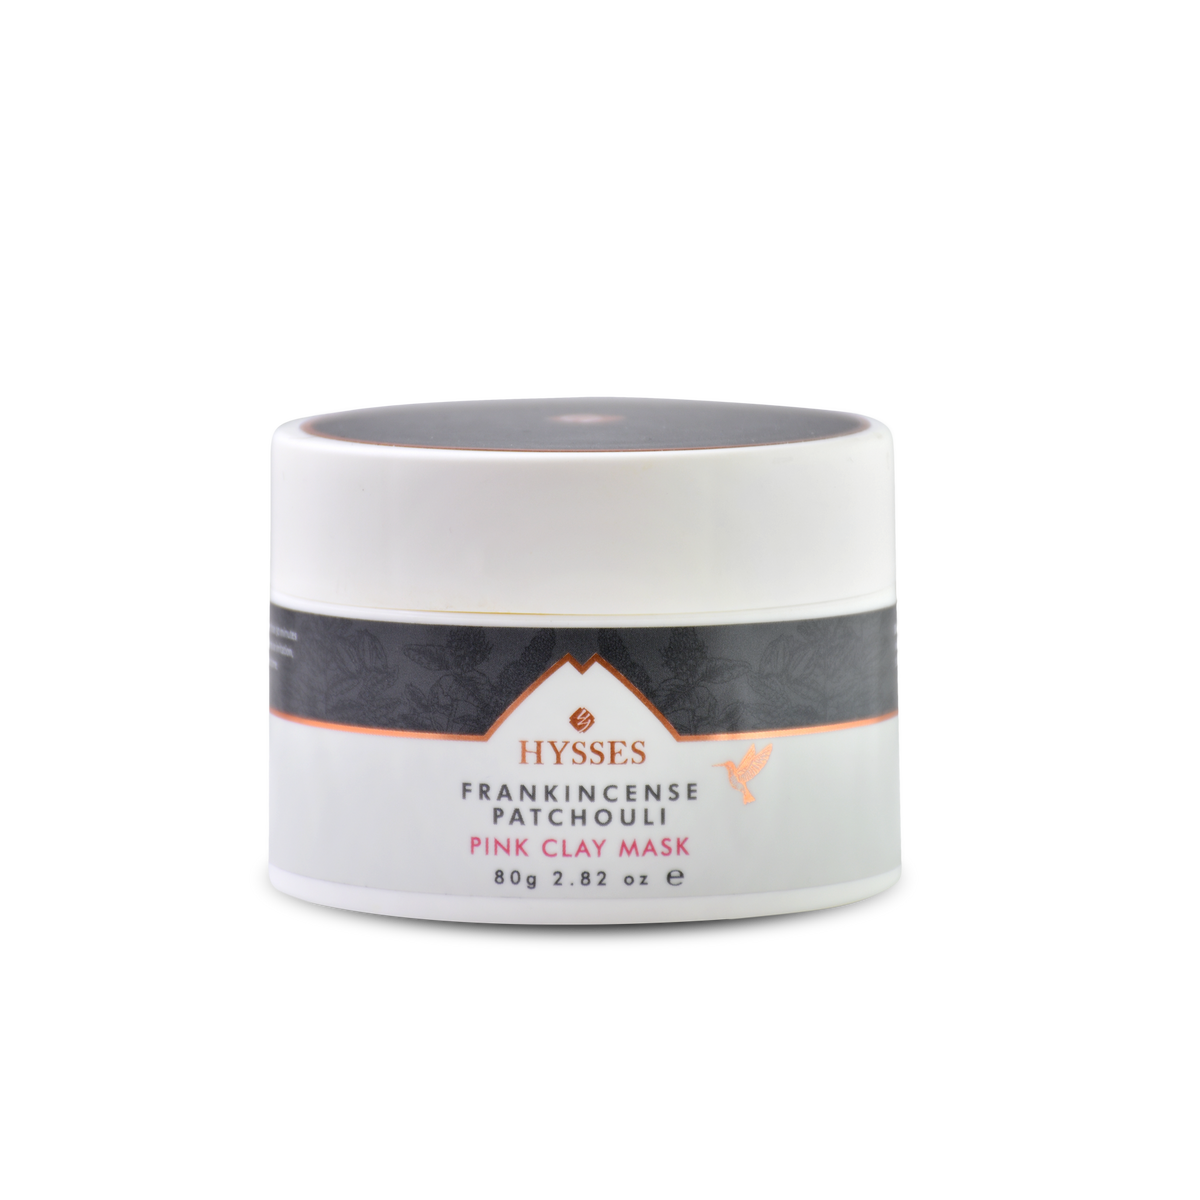 Frankincense Patchouli Pink Clay Mask - HYSSES